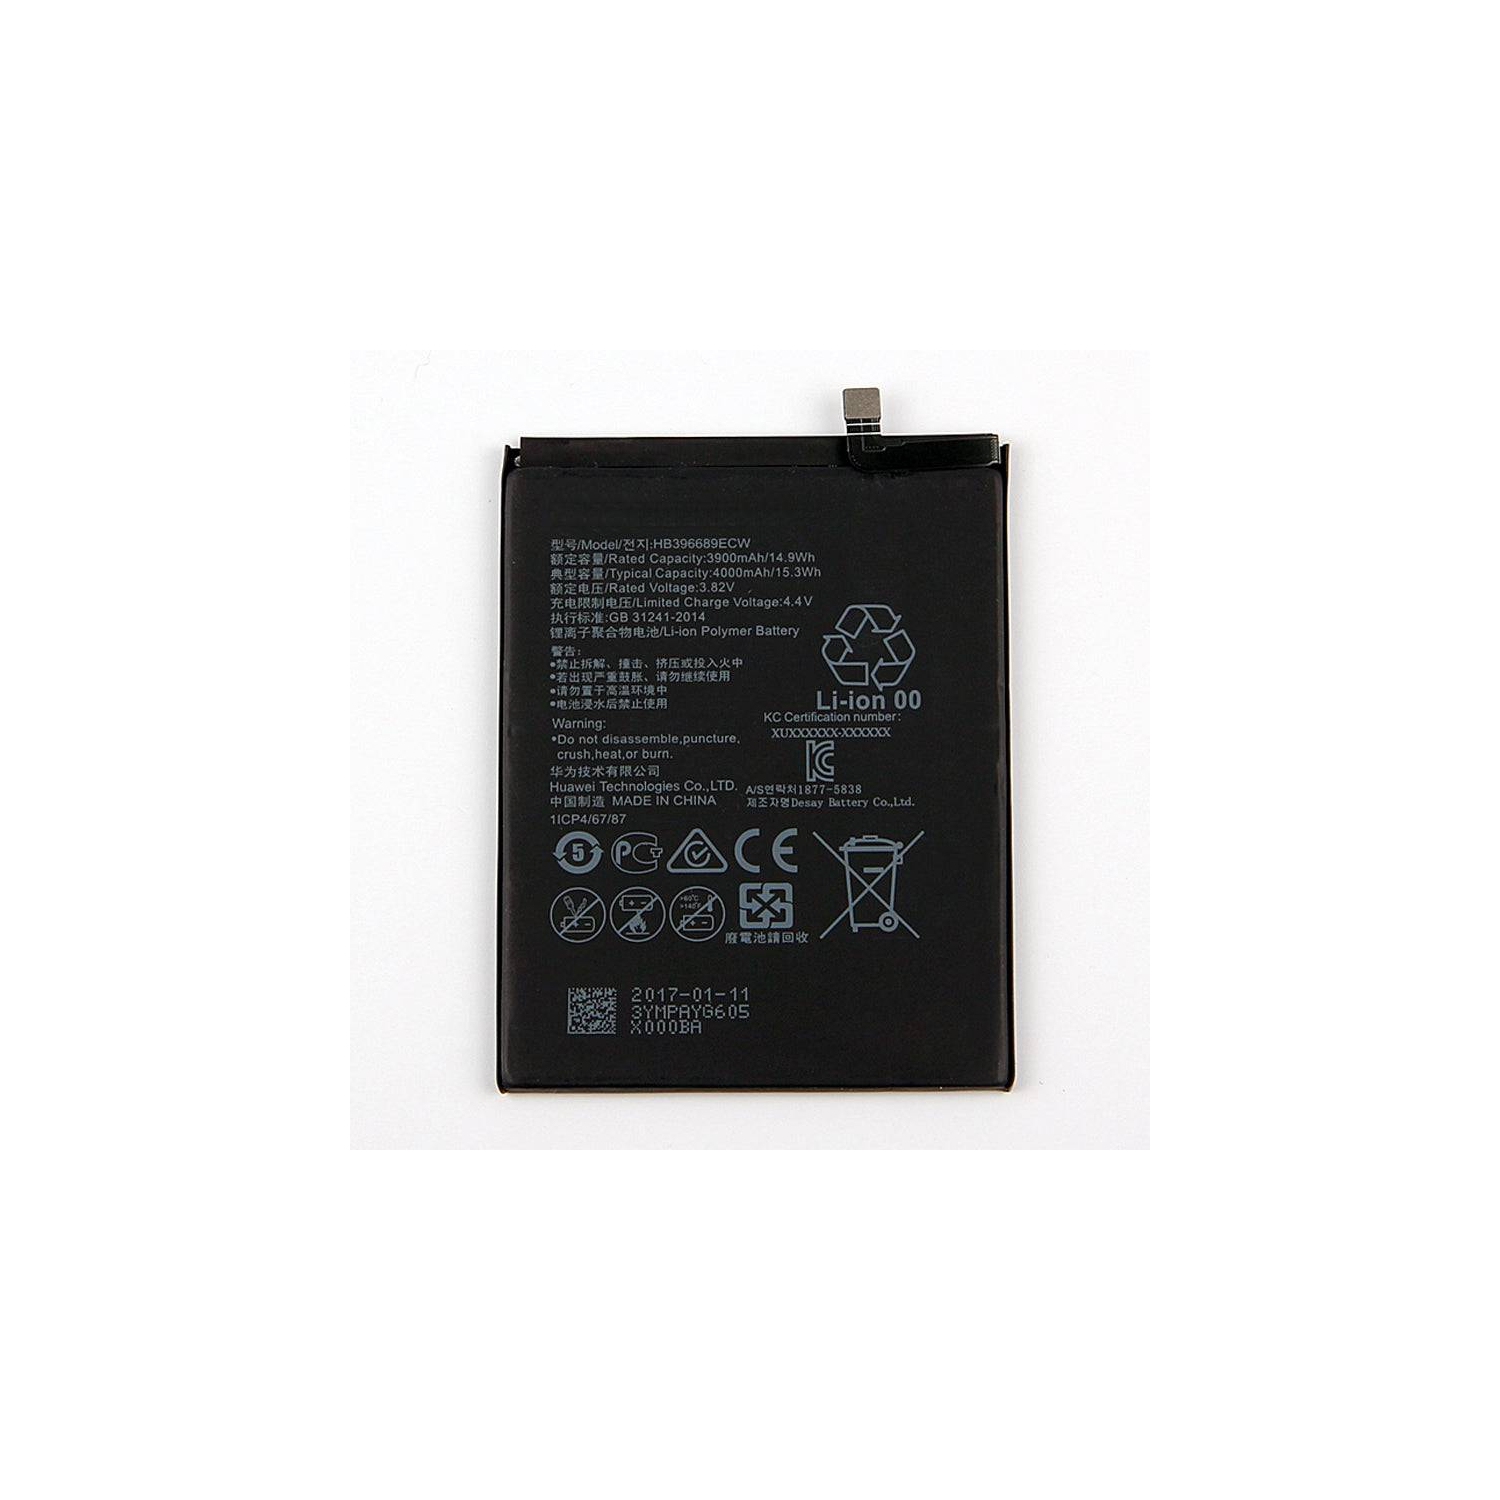 FAST Charging New Battery Replacement for Huawei Y7 / Mate 9 HB396689ECW